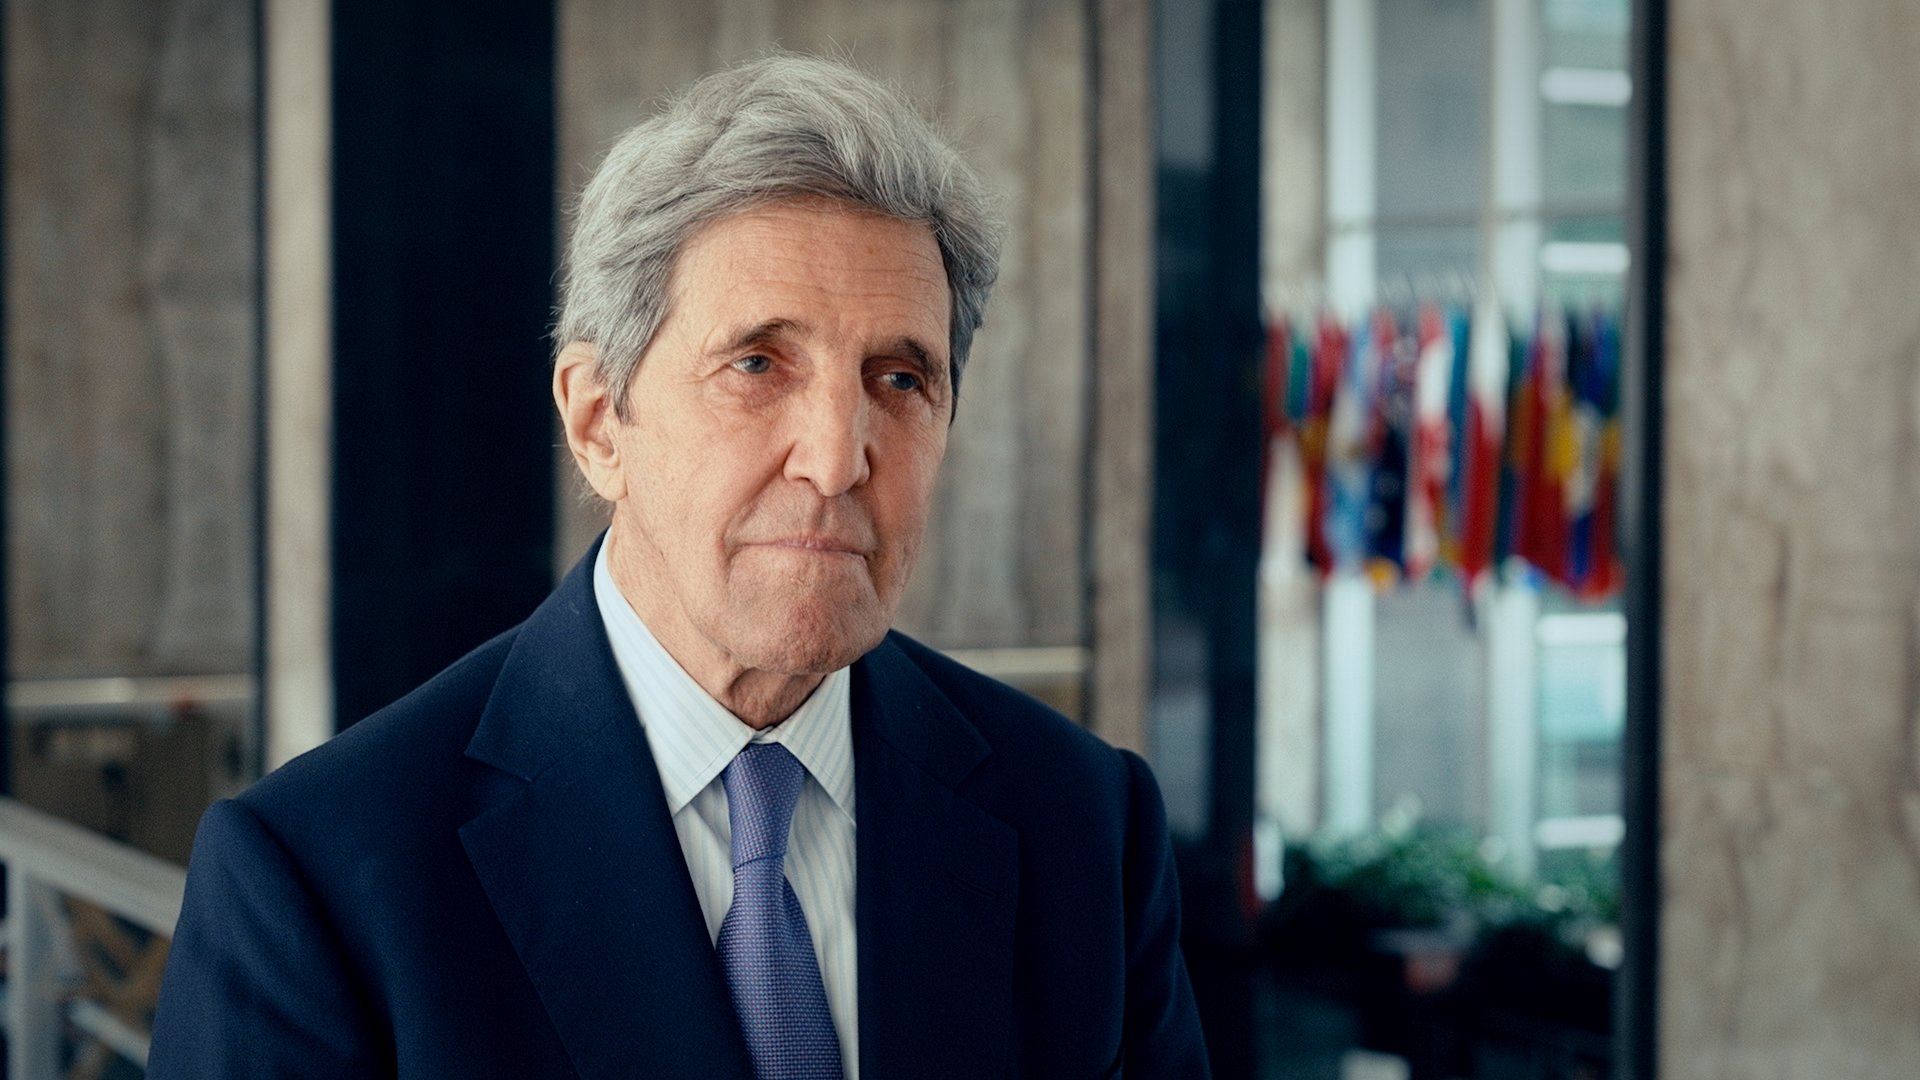  John Kerry, U.S. Special Presidential Envoy for Climate 